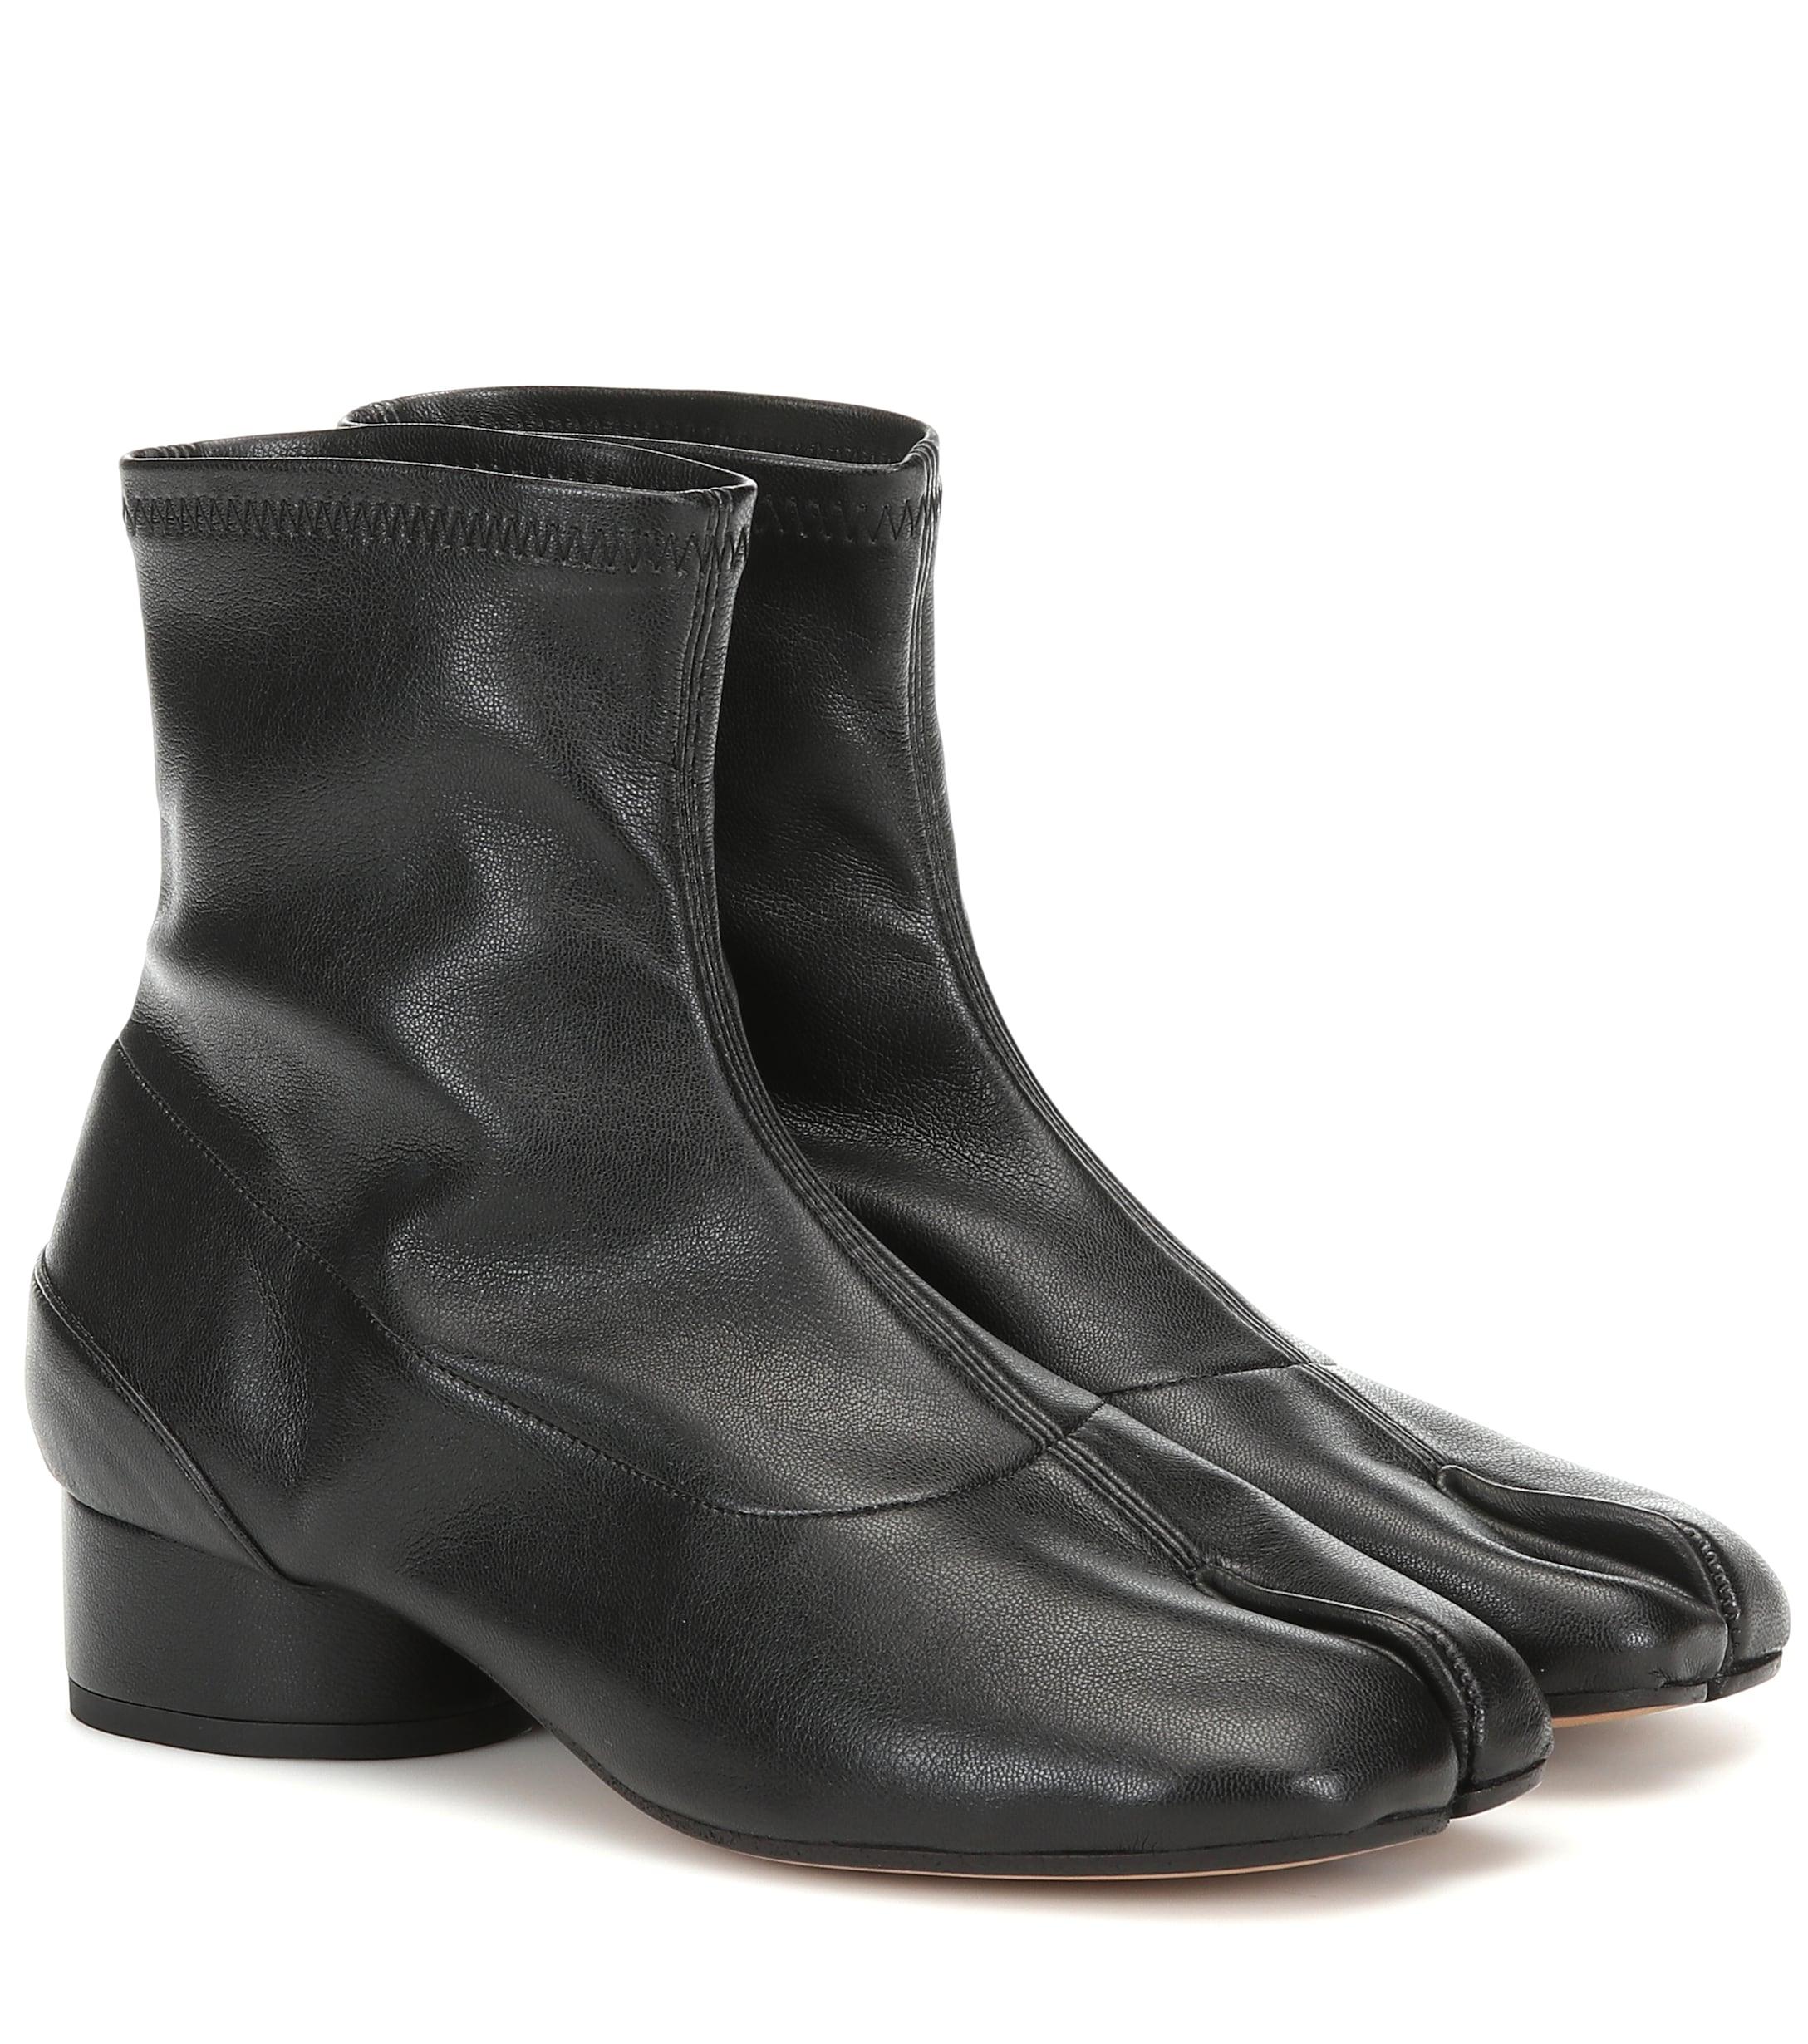 Maison Margiela Tabi Leather Ankle Boots in Black - Lyst